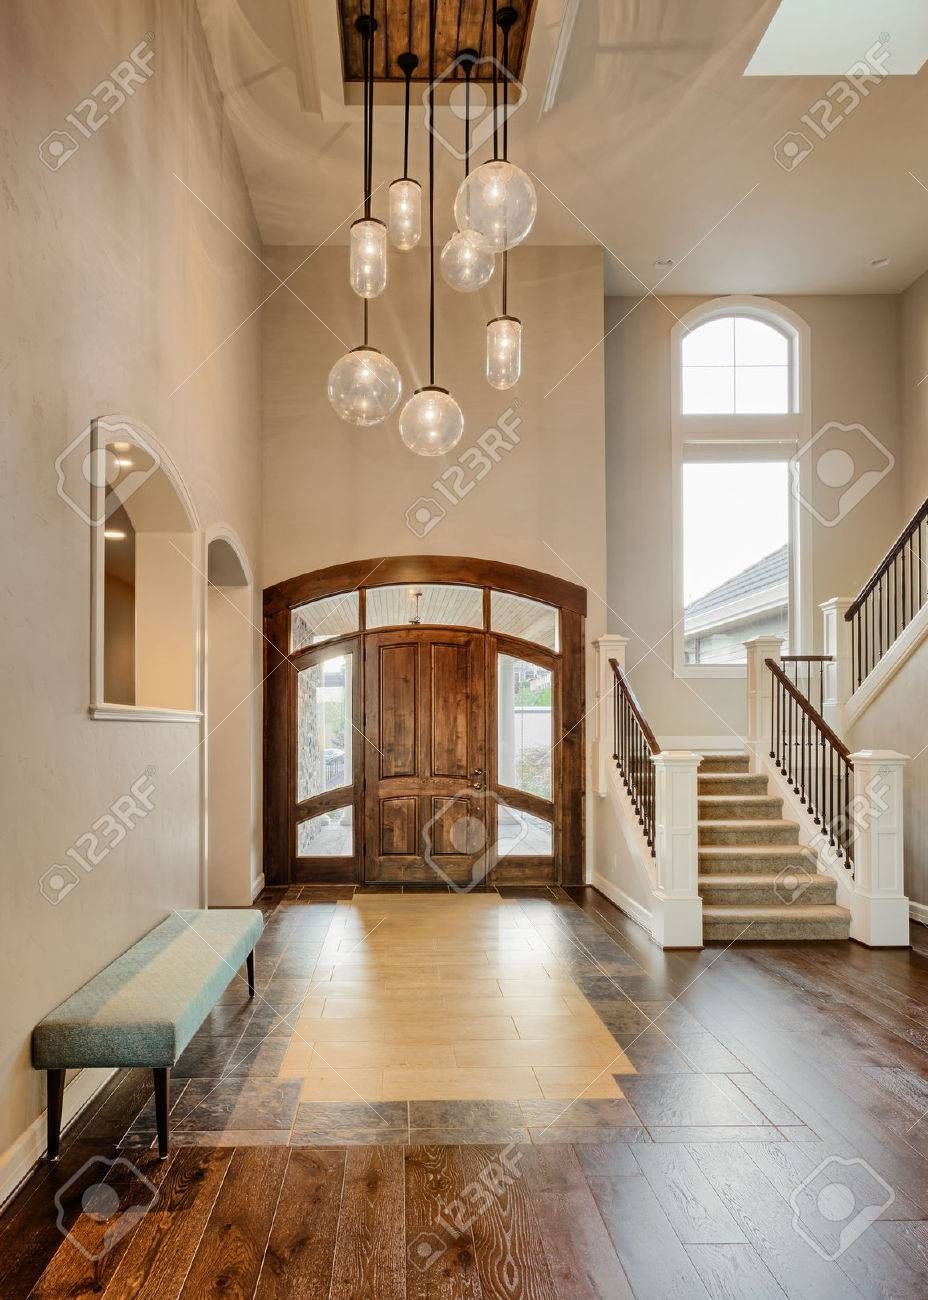 Beautiful Foyer In Home; Entryway With Stairs, Pendant Lights Intended For Entryway Pendant Lights (View 5 of 15)